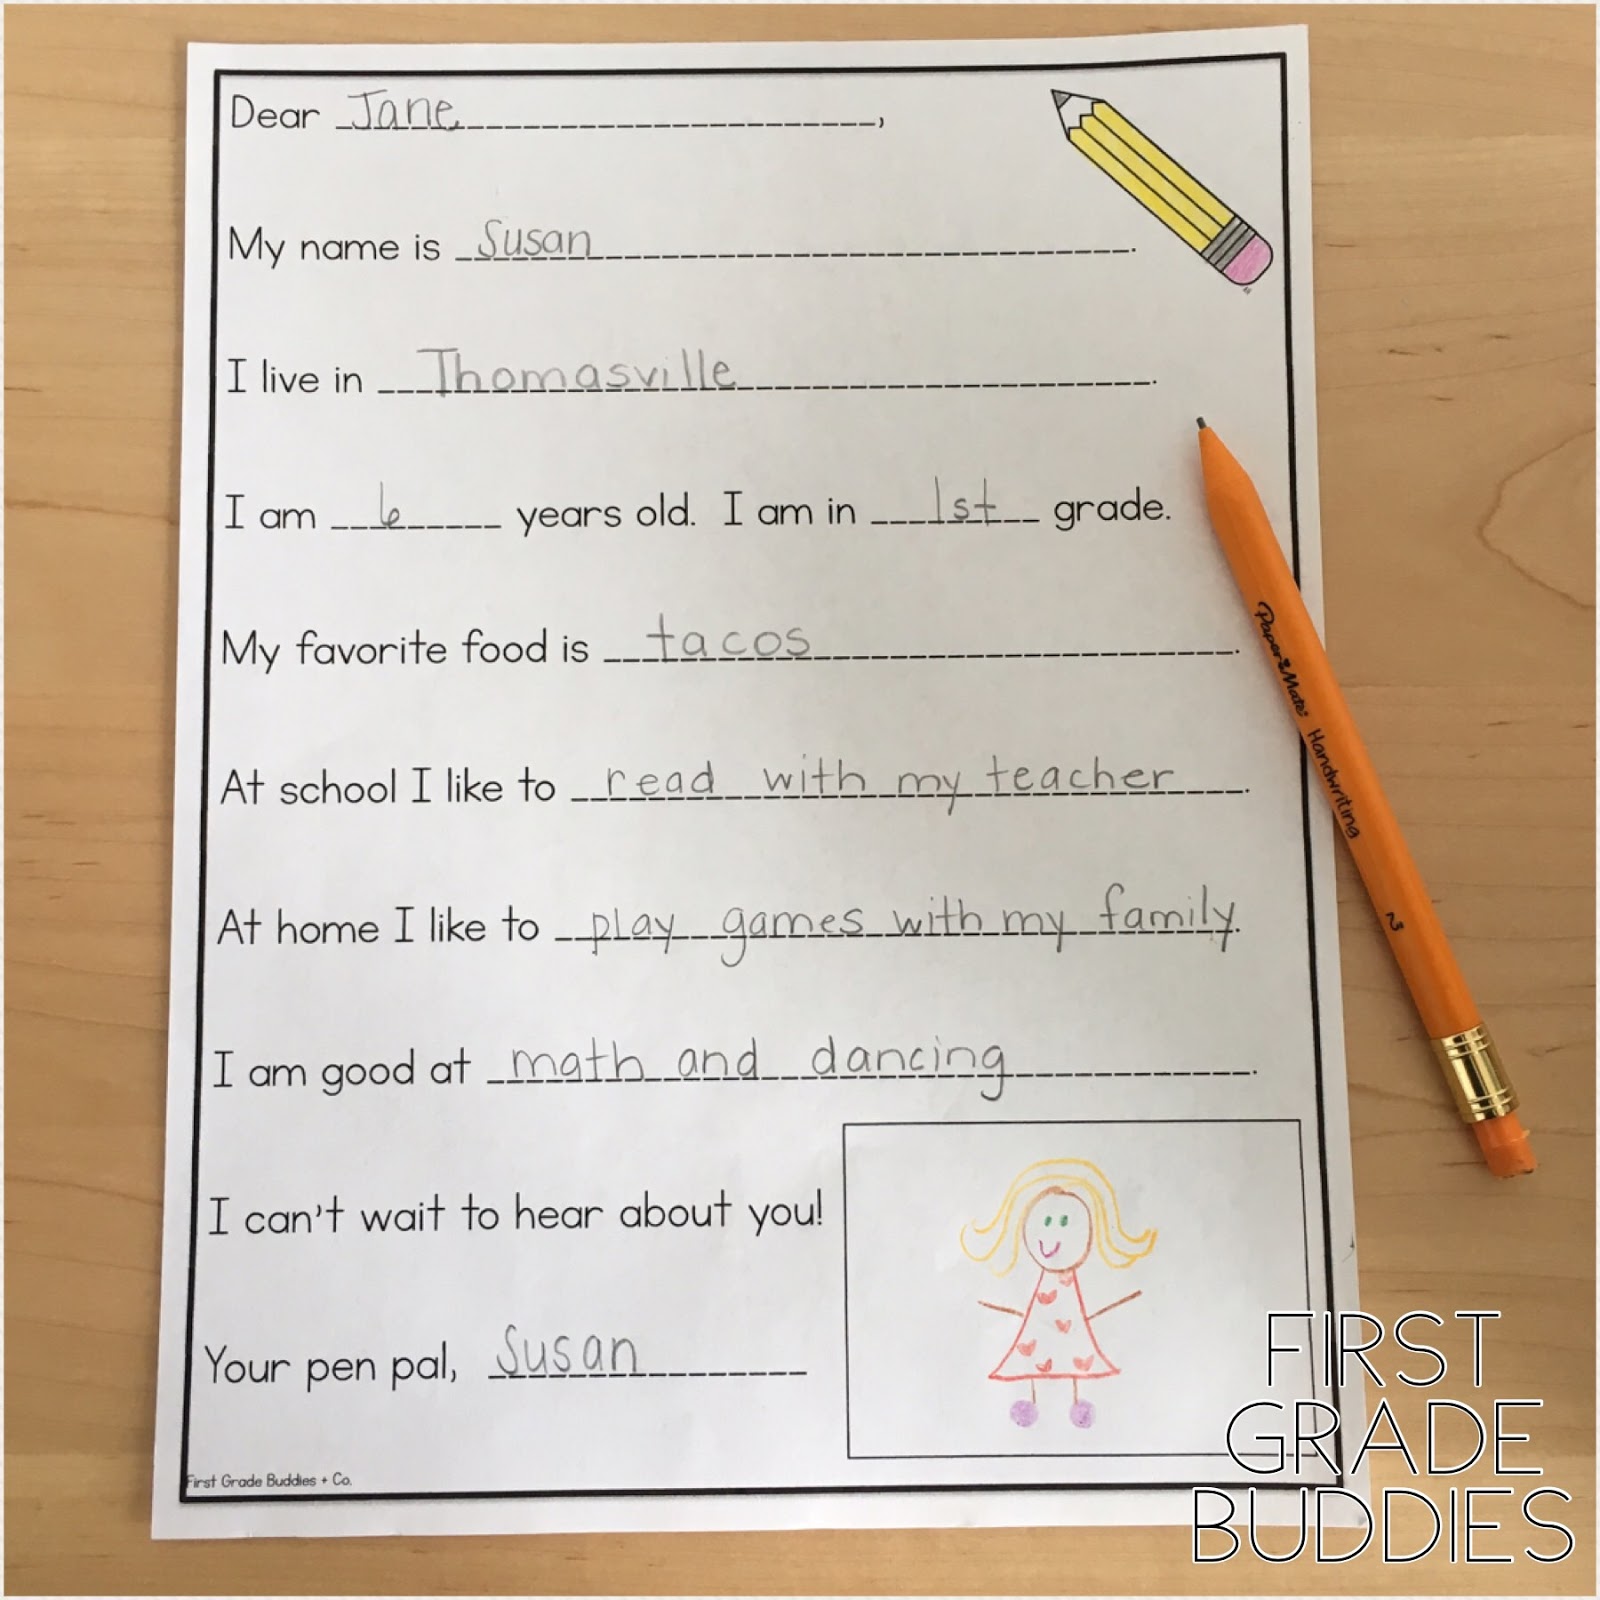 Pen Pals Through the Year  First Grade Buddies Within Pen Pal Letter Template